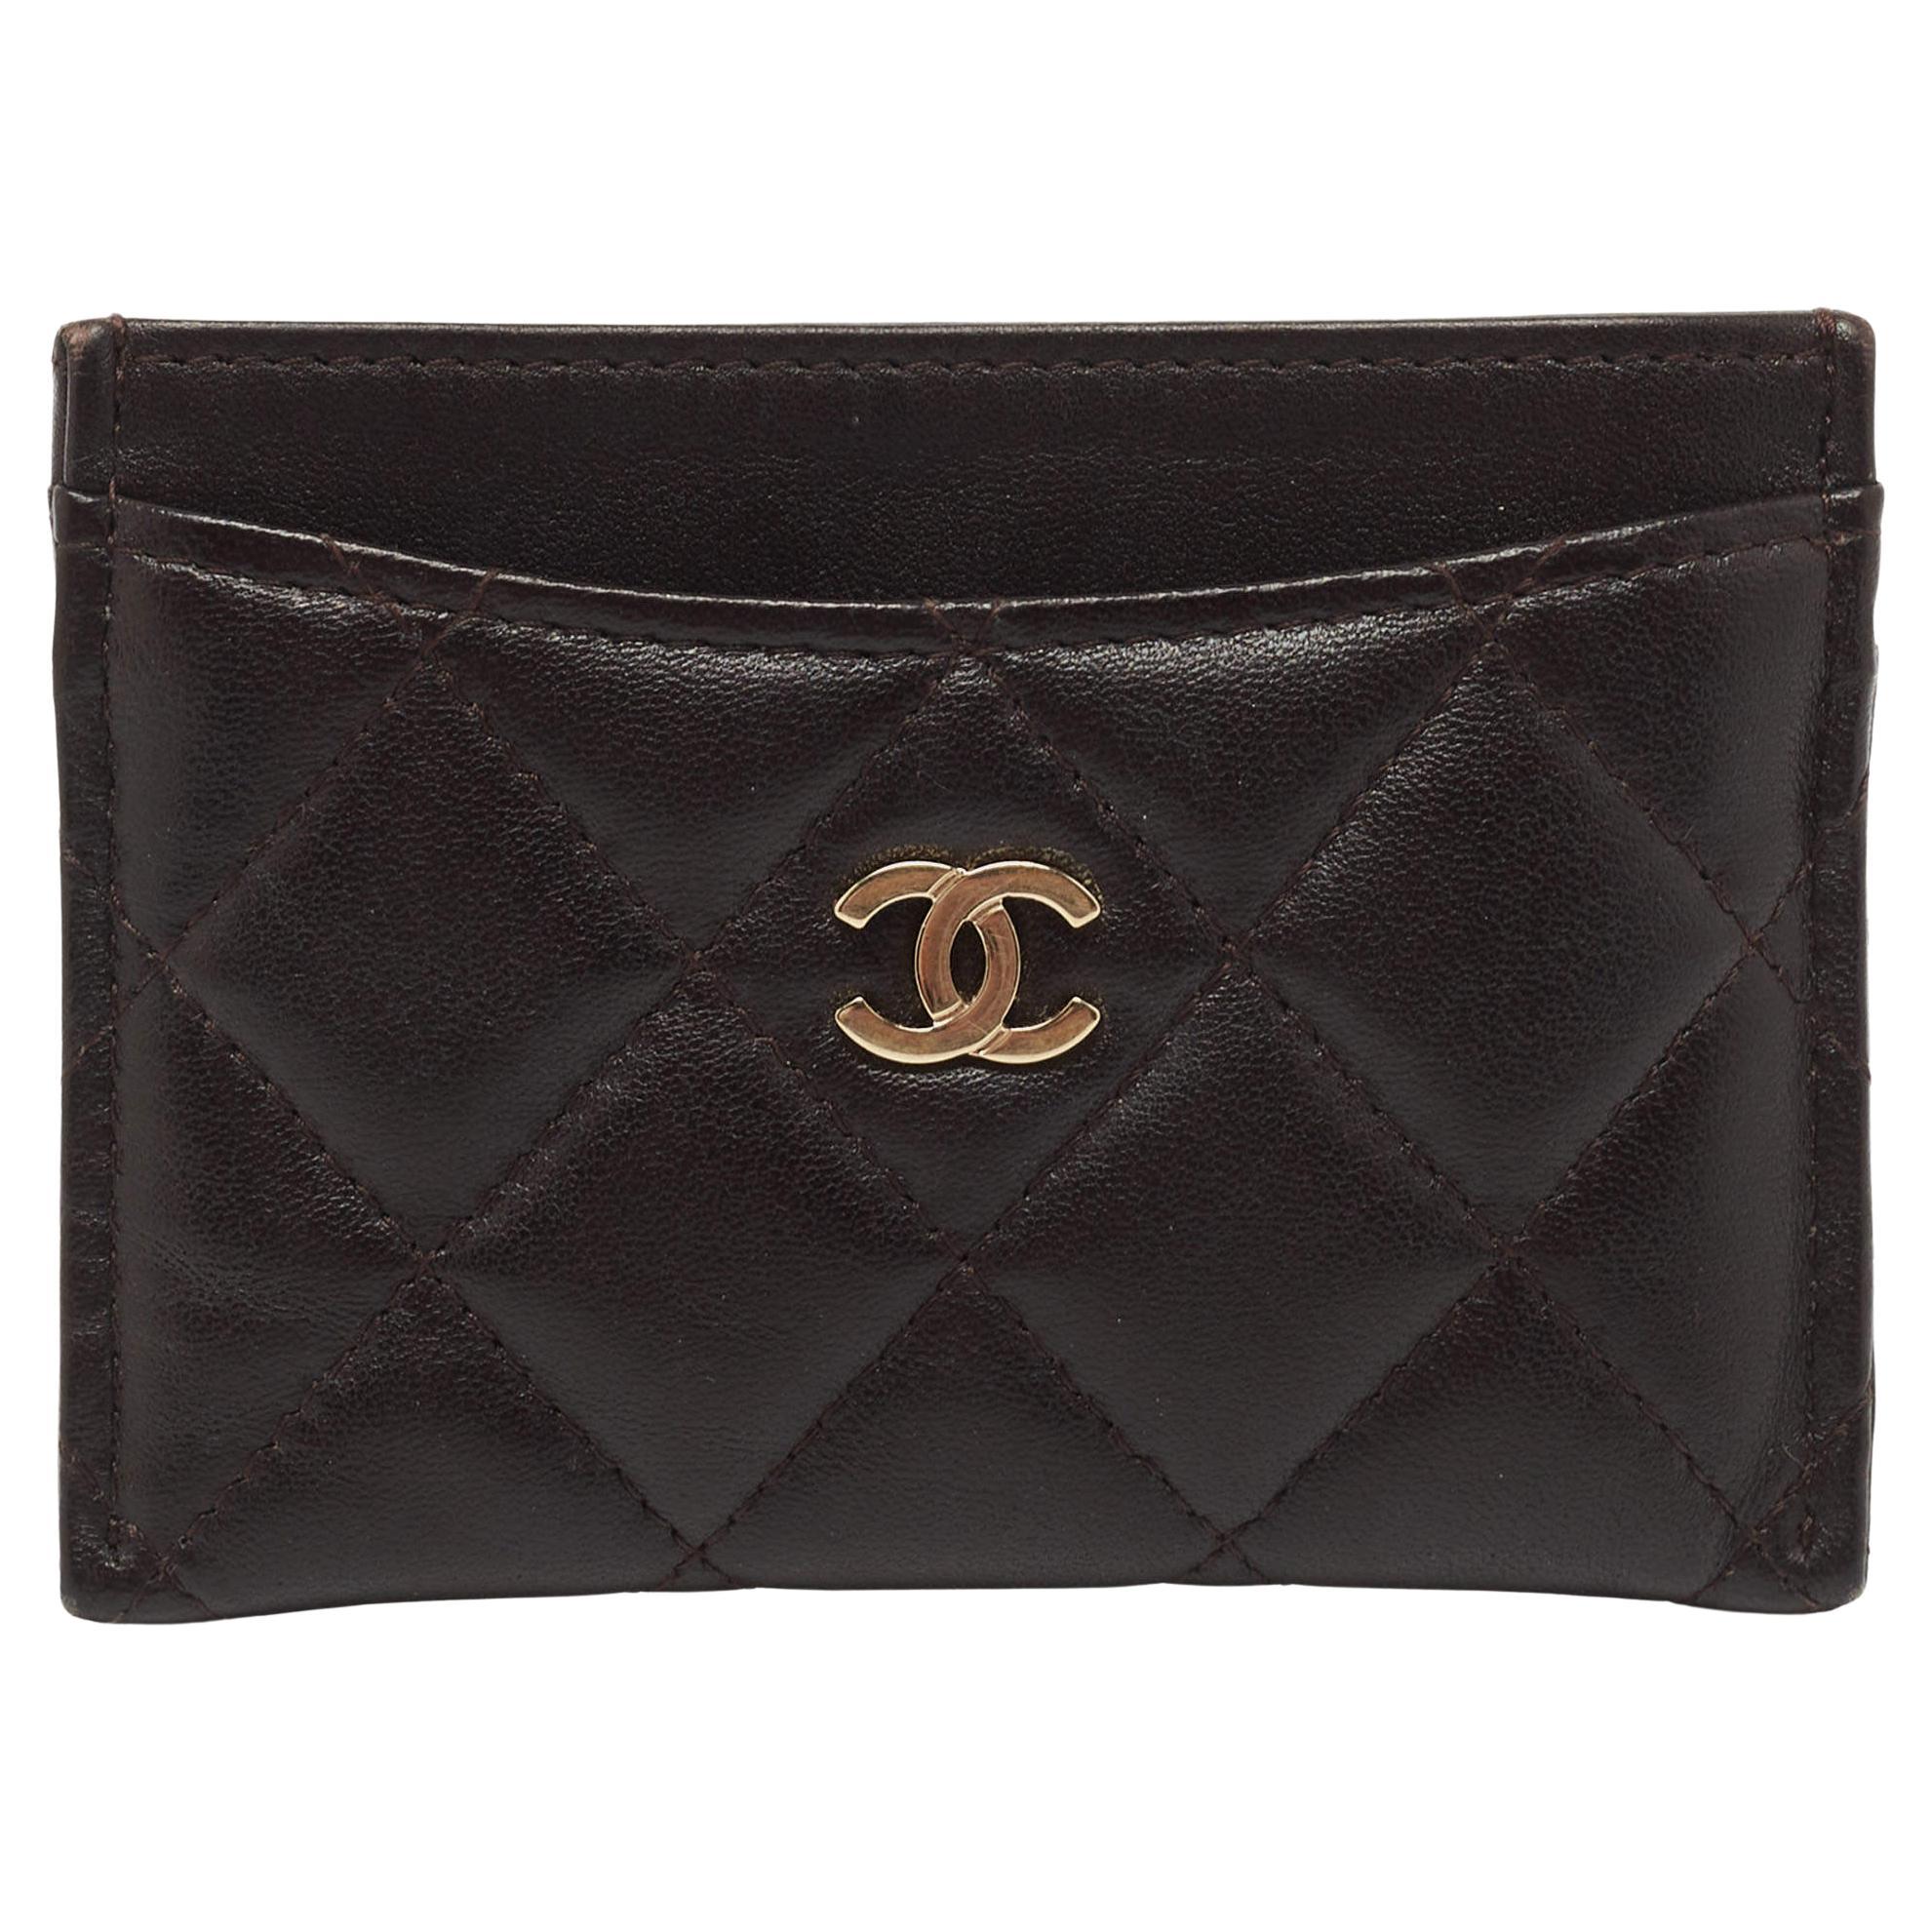 Chanel Brown Quilted Lambskin Leather Classic Card Holder